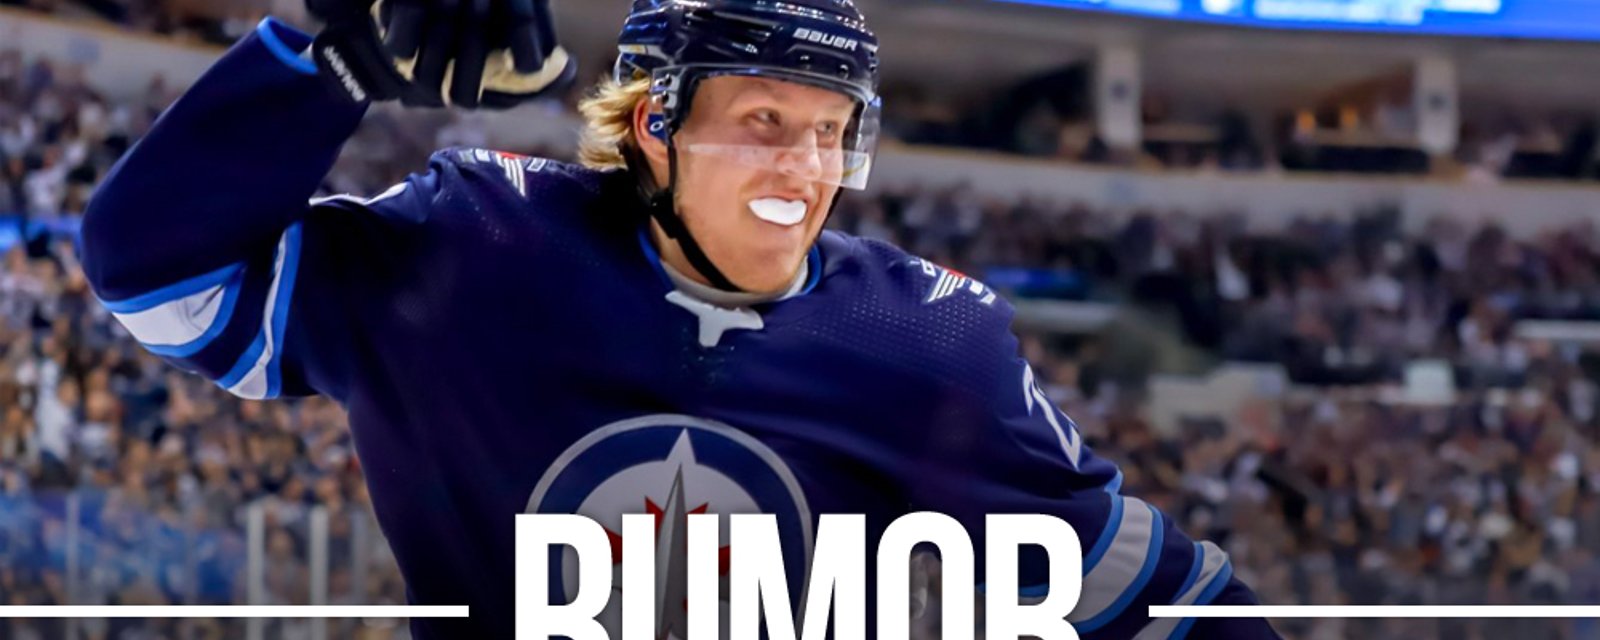 Laine trade rumors pick up steam, reports of at least one offer on the table